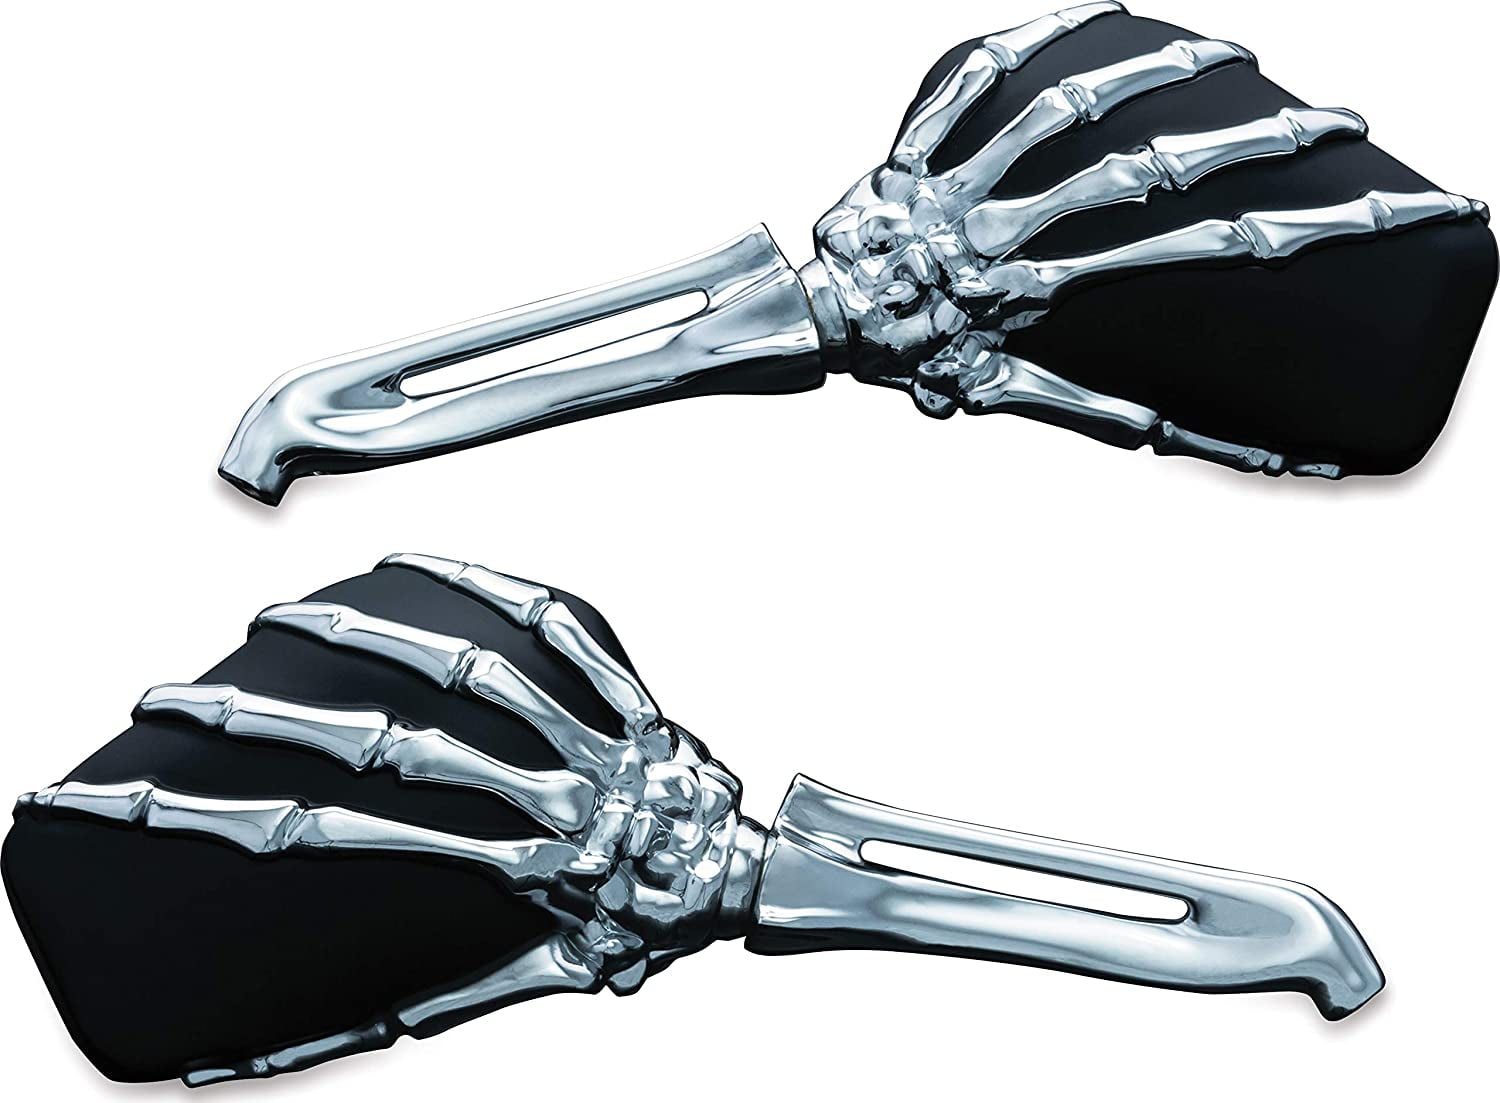 Kawasaki Cruisers side chrome mirrors with skeleton hand motorcycle Free Adapters Honda Suzuki Krator Custom Chrome Motorcycle Skeleton Bone Hands Mirrors Compatible with Most Harley Davidsons 